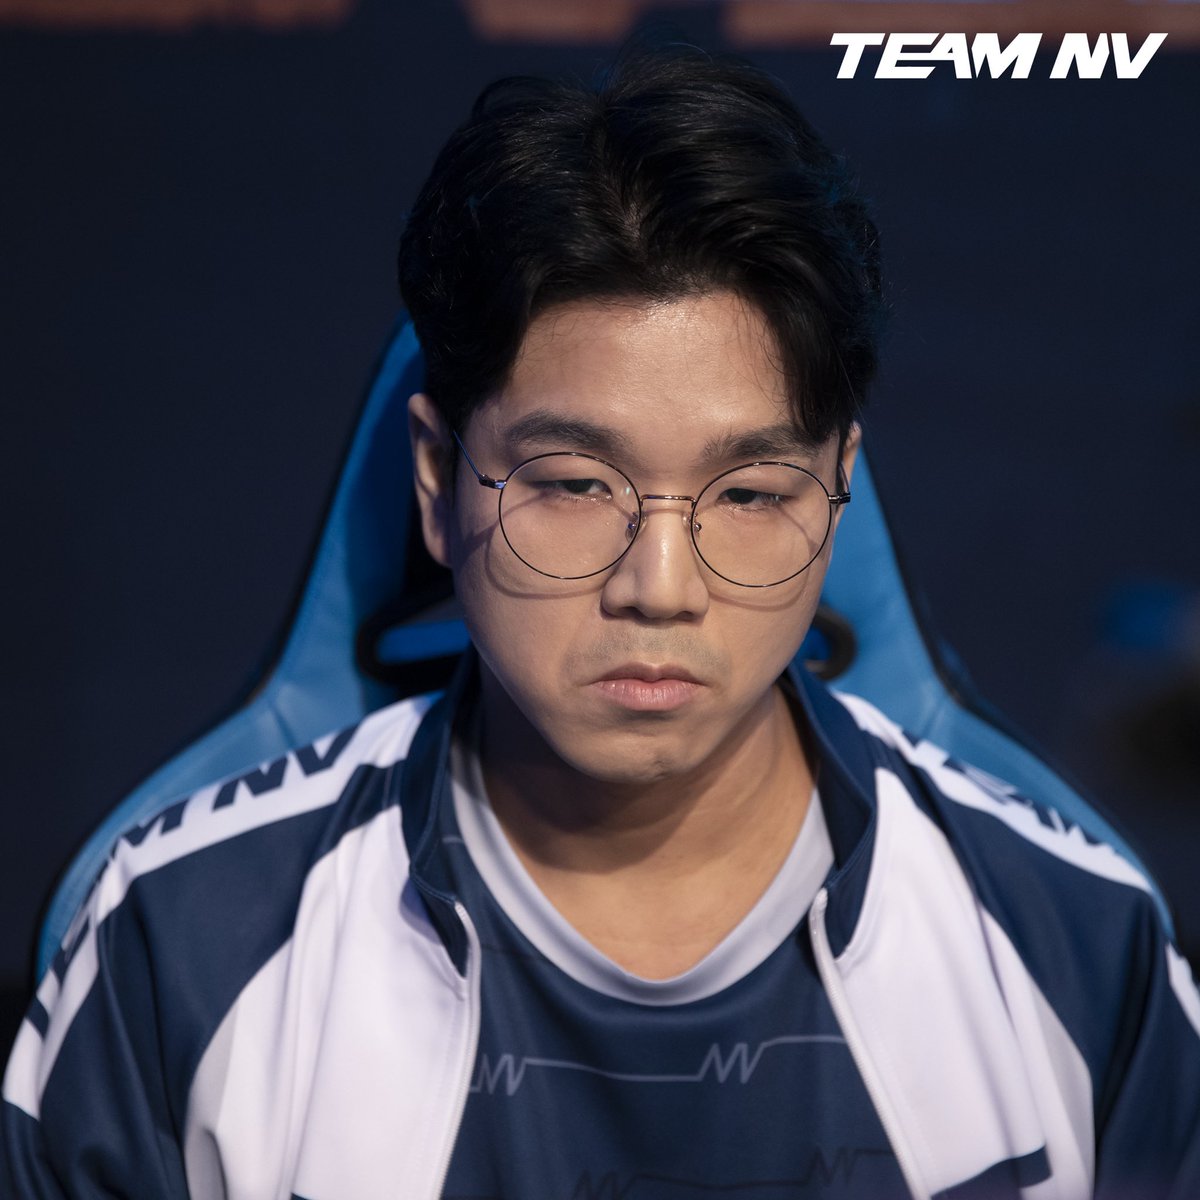 Hello, I am Sooho 'DRG' Park, Starcraft2 Progamer. I am looking for a new contract. By the consideration of the current team 'Club NV', there are no ristrictions on the new contract. If you are interested in, Please contact to my email:tngh512@naver.com or DM. Thank you.